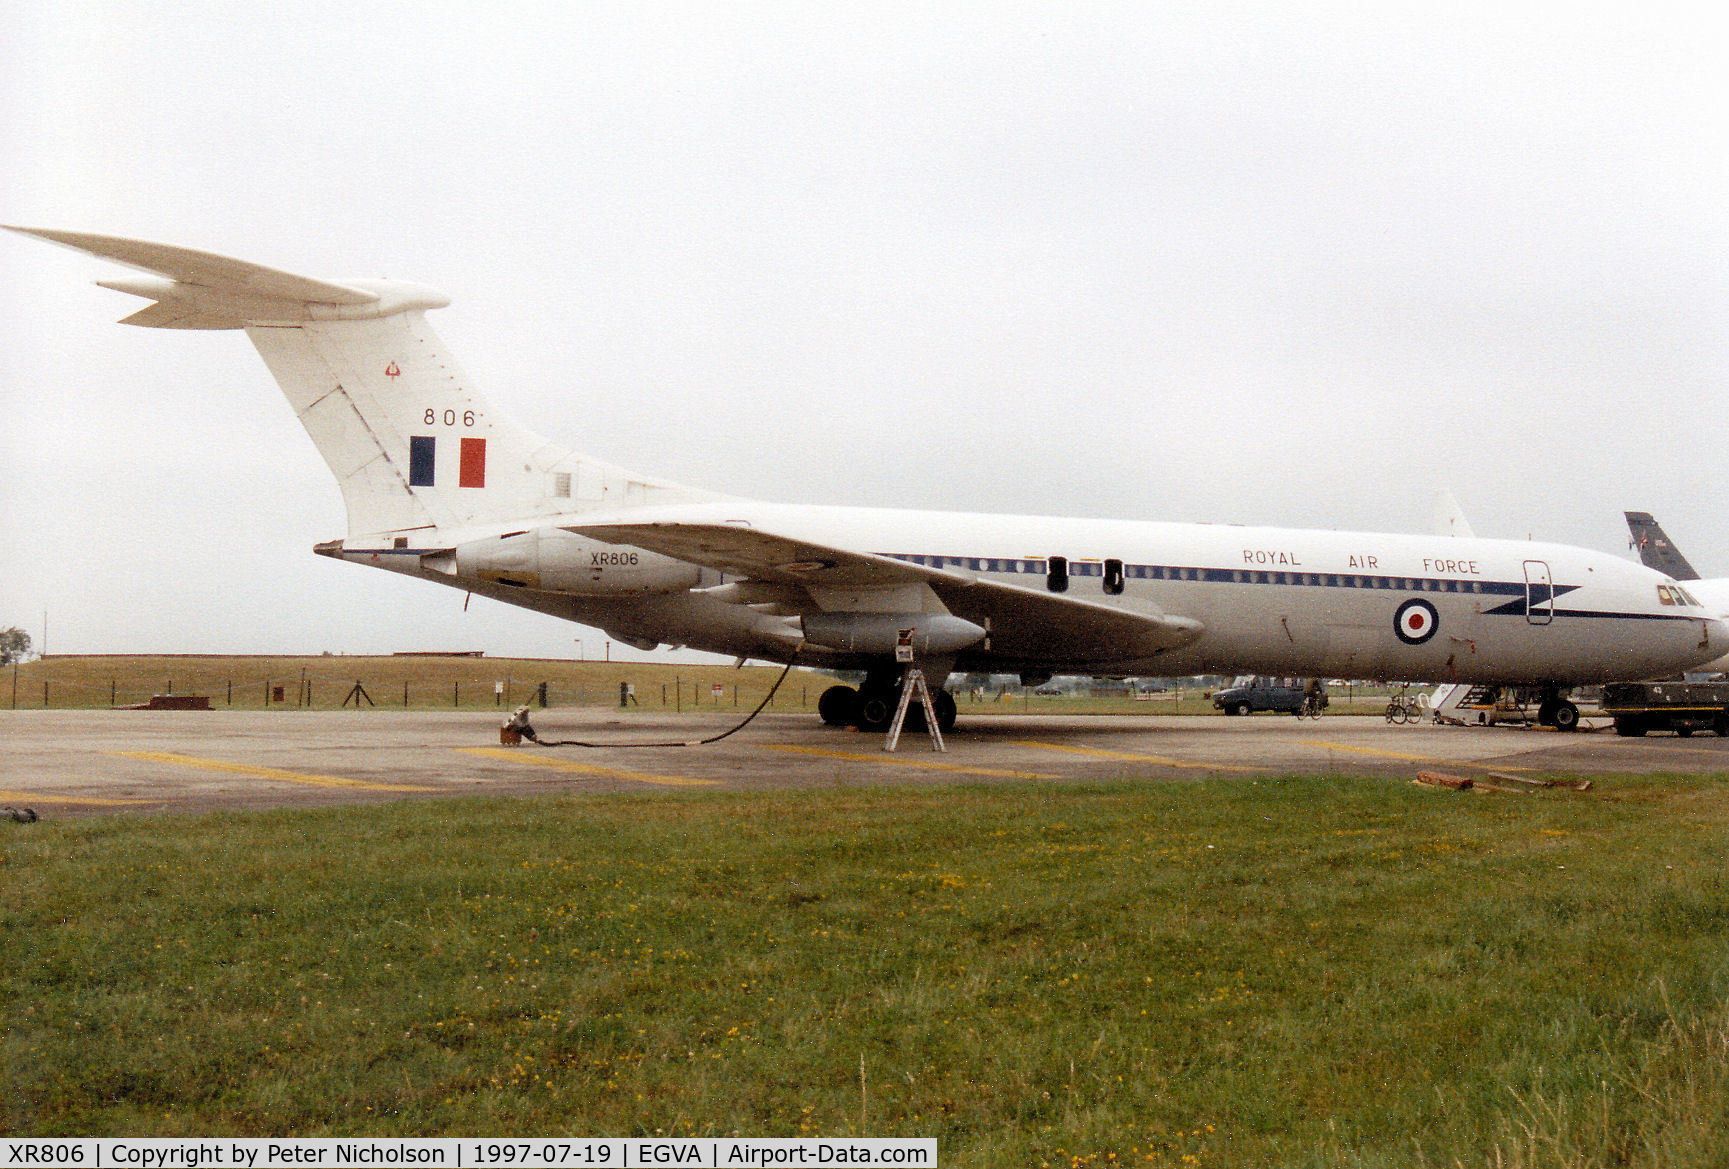 XR806, 1967 Vickers VC10 C.1K C/N 826, Another view of the 10 Squadron VC-10 C.1K, callsign Ascot 855, on display at the 1997 Intnl Air Tattoo at RAF Fairford.